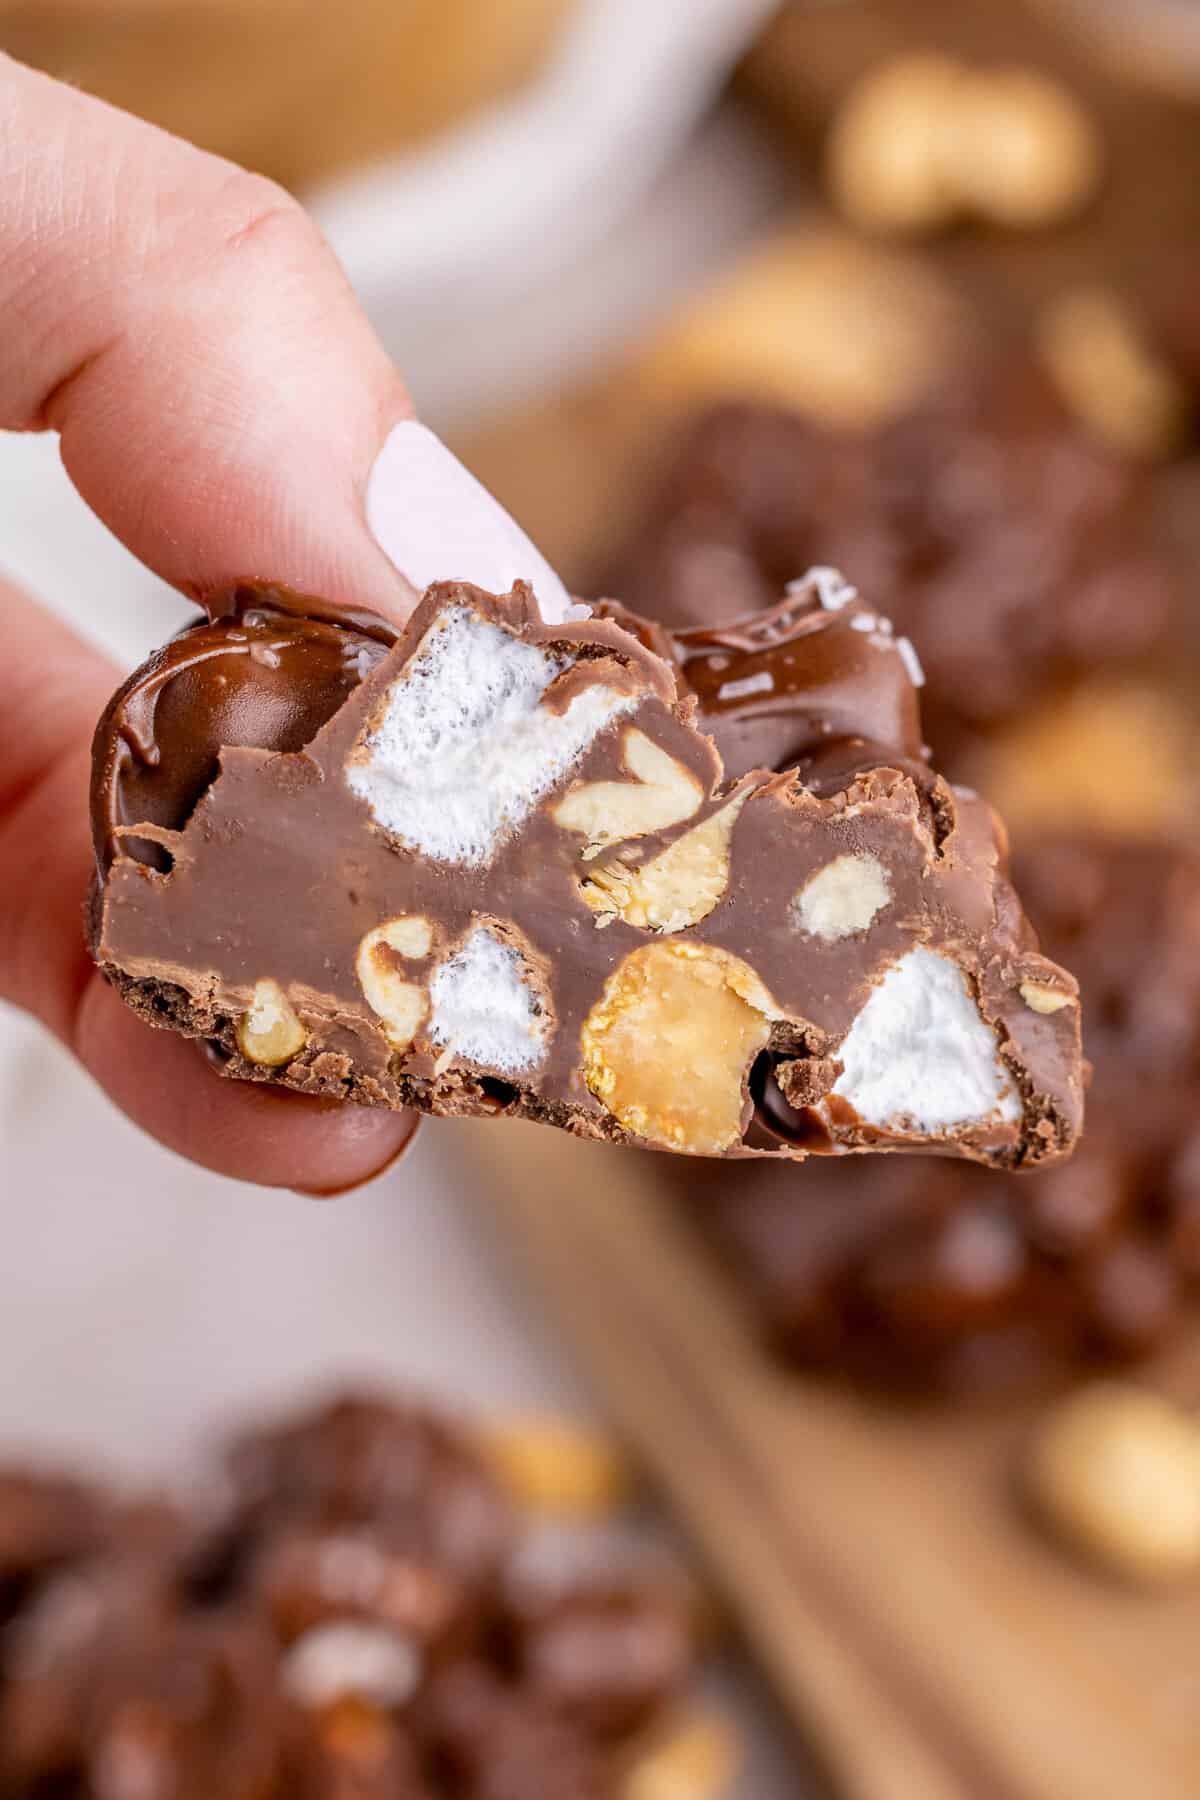 Hand holding piece of rocky road chocolate cut in half to show marshmallows and peanuts inside.